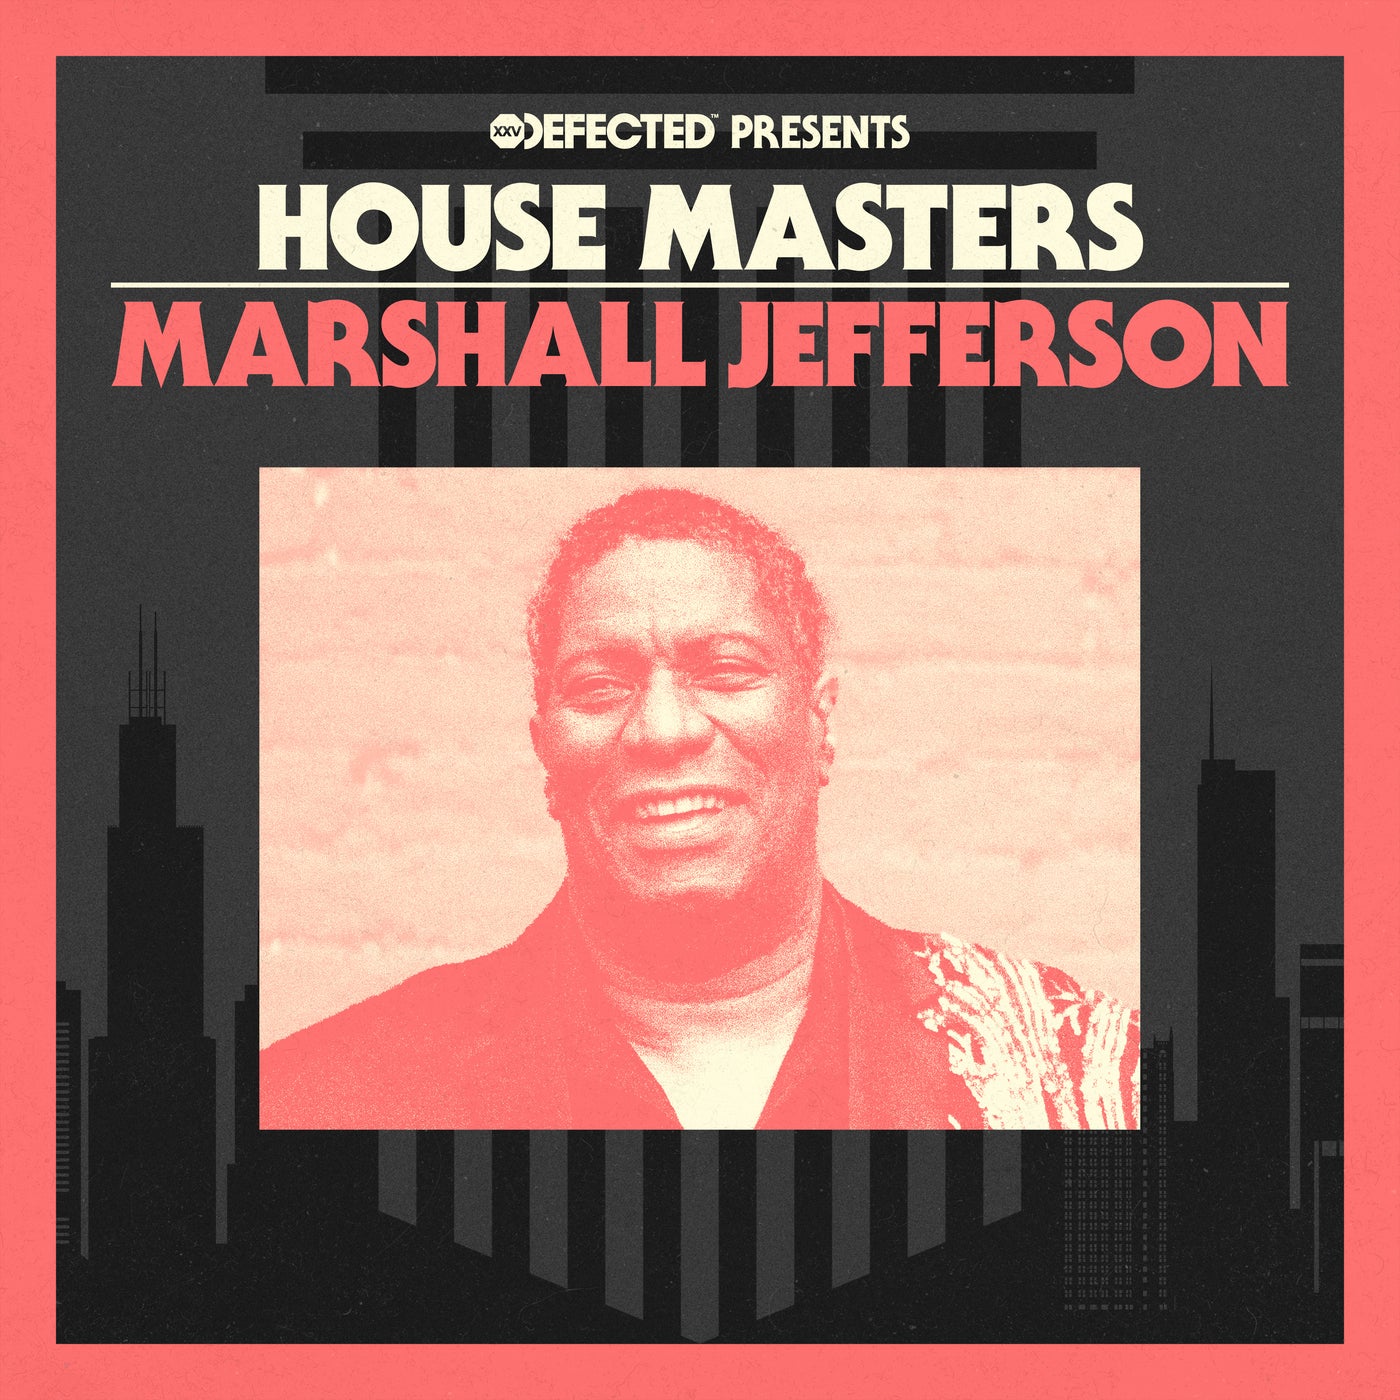 image cover: VA - Defected presents House Masters - Marshall Jefferson on Defected